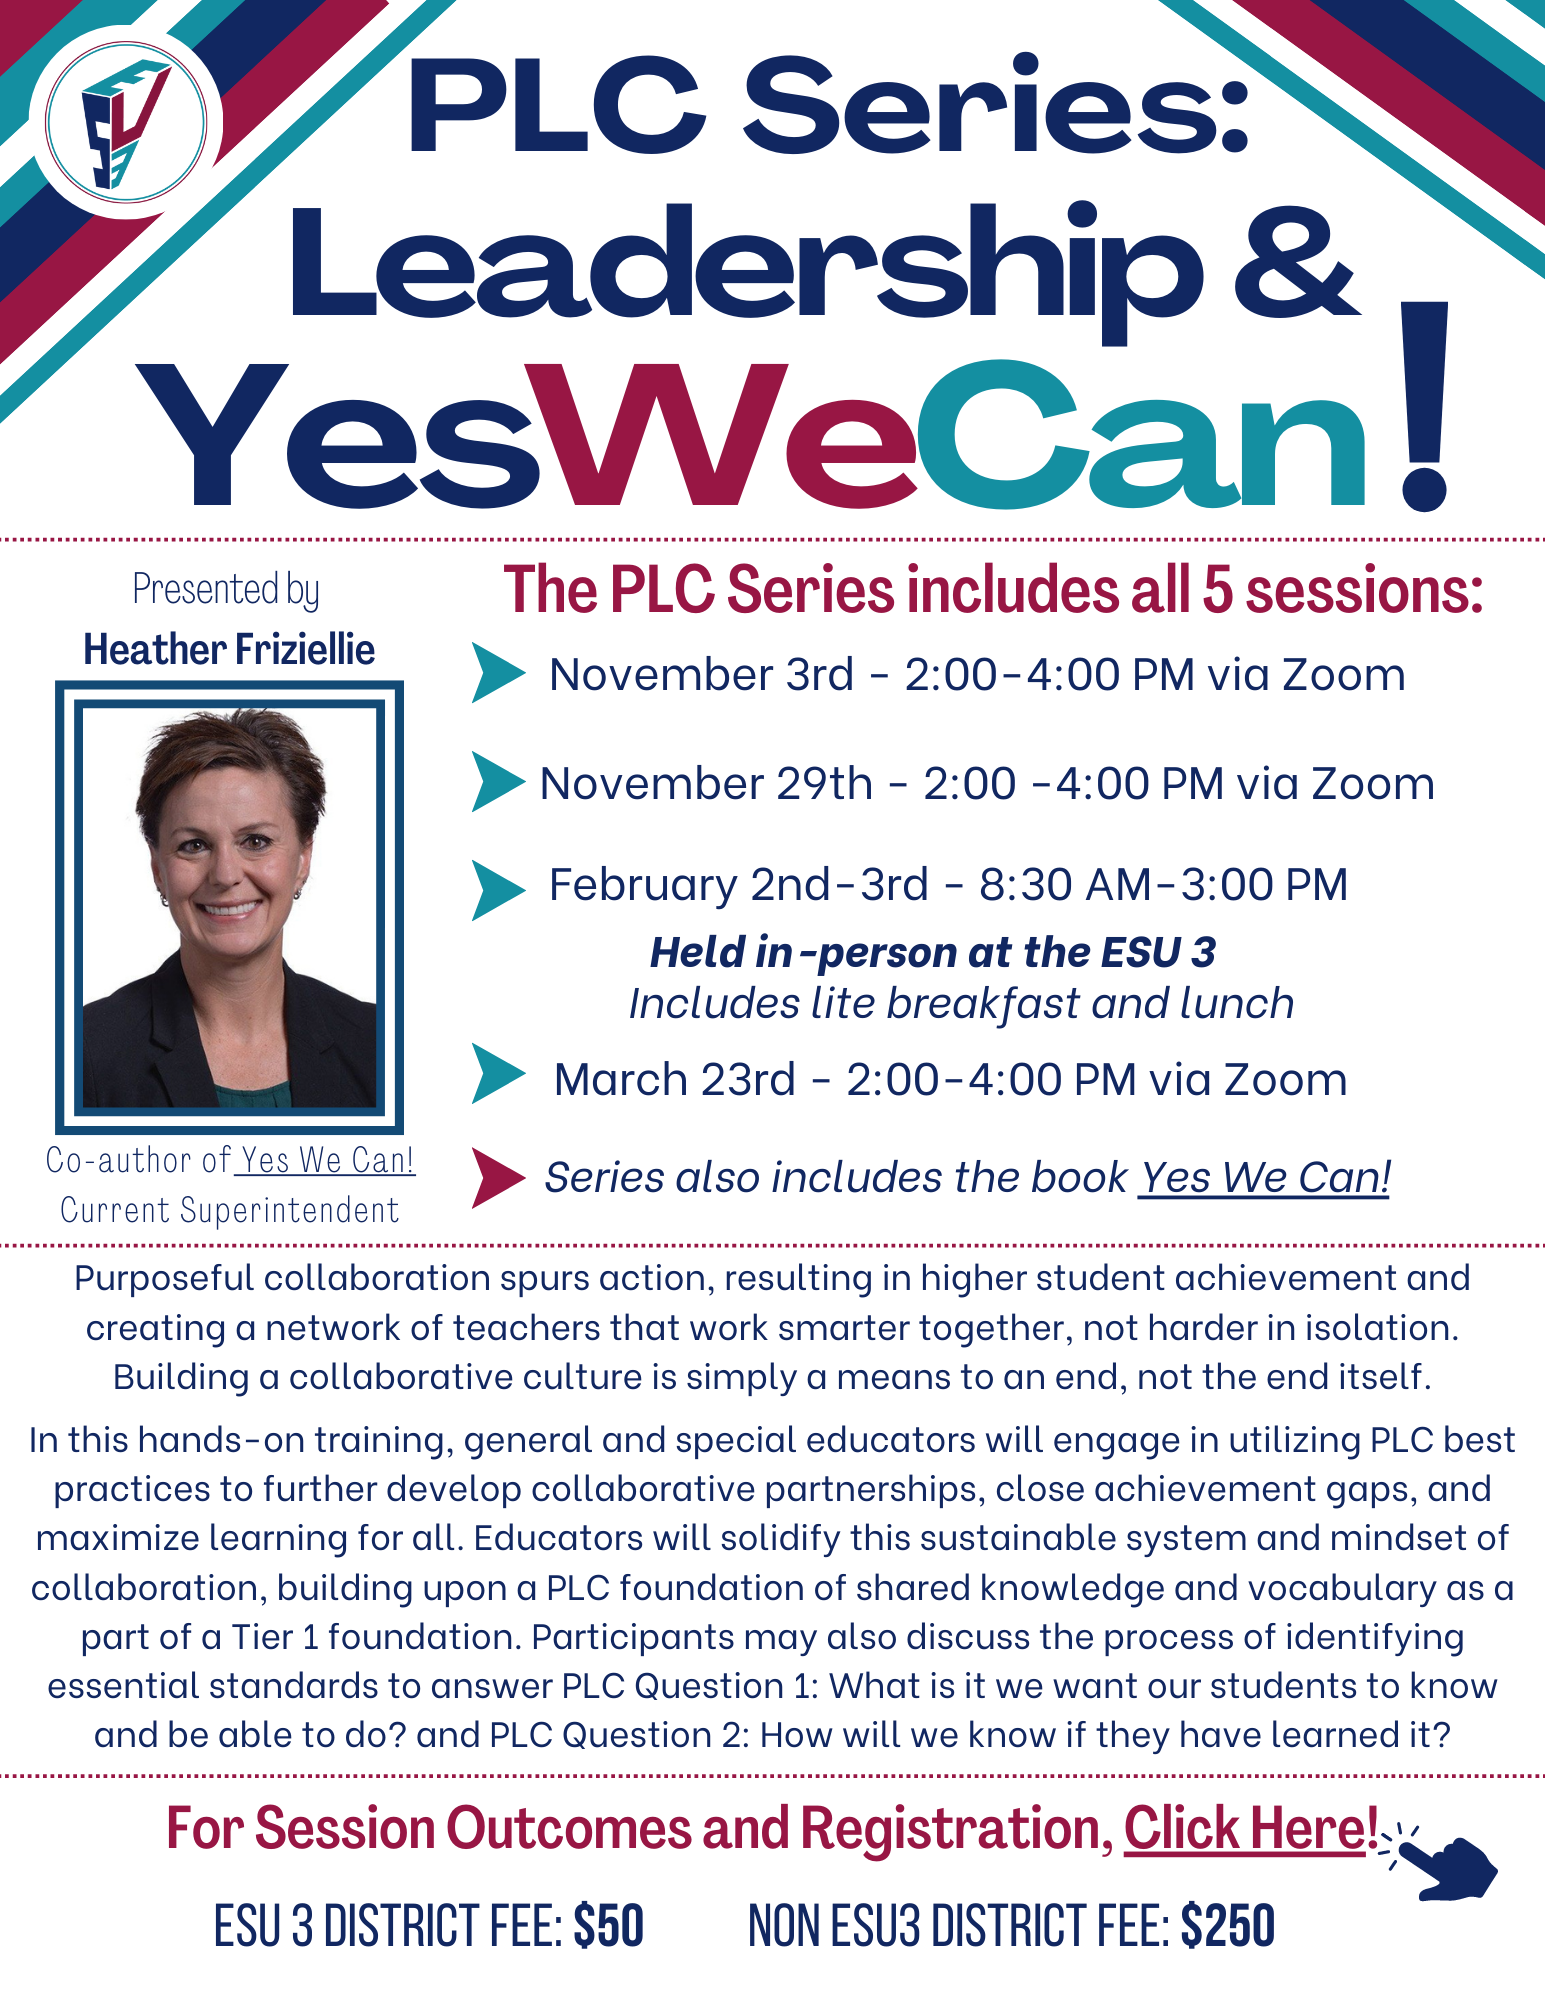 Click here to register for Yes We Can